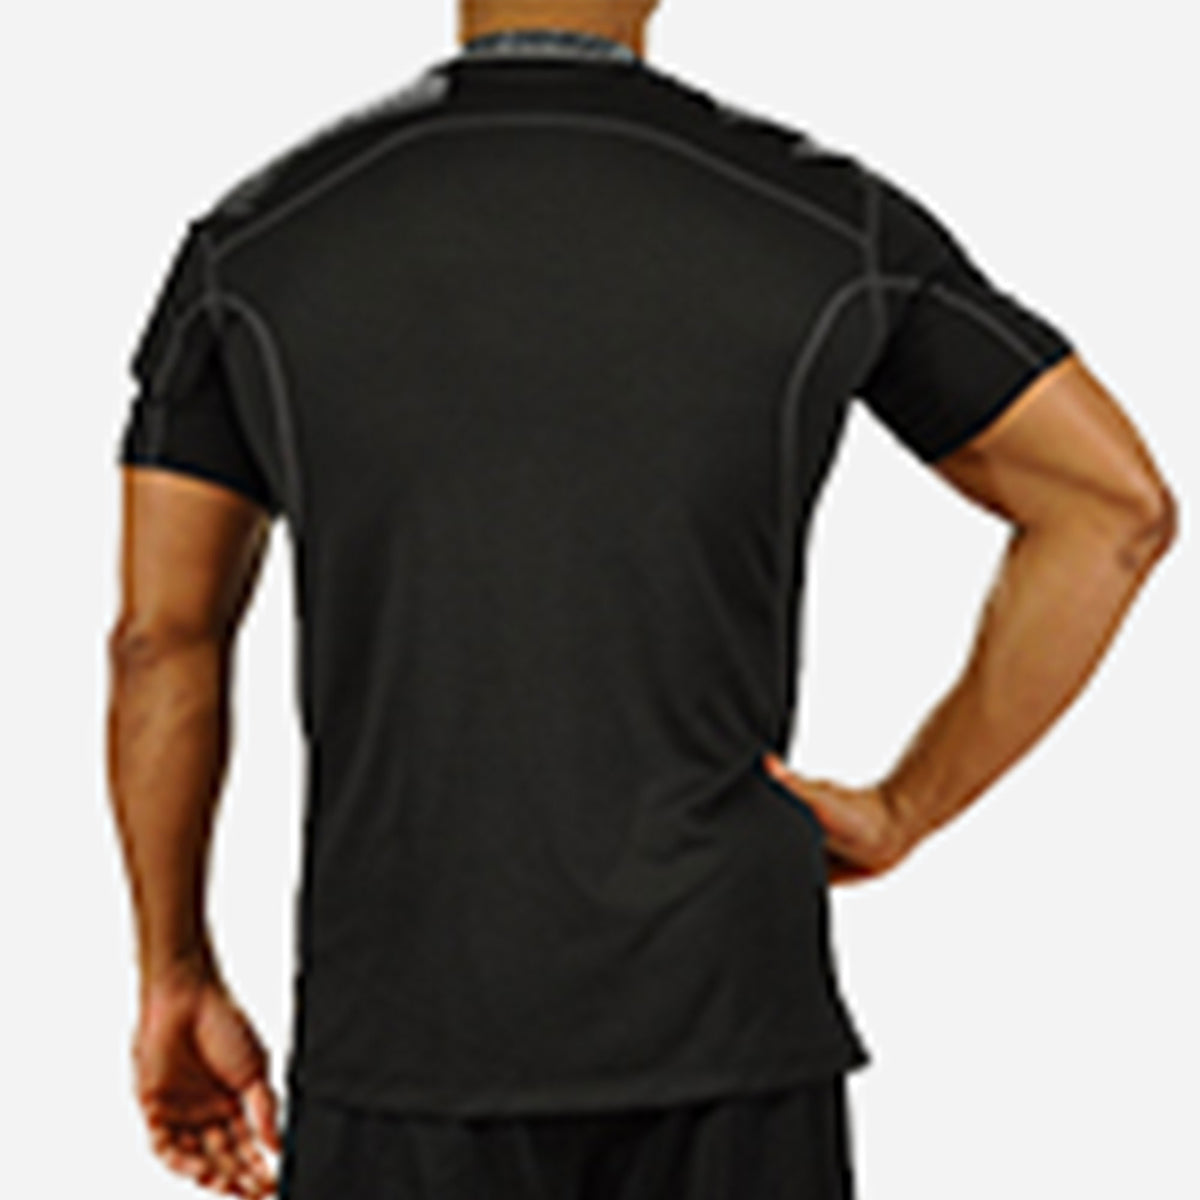 Nike Pro Combat Hypercool Fitted Short Sleeve 3.0 - Men's